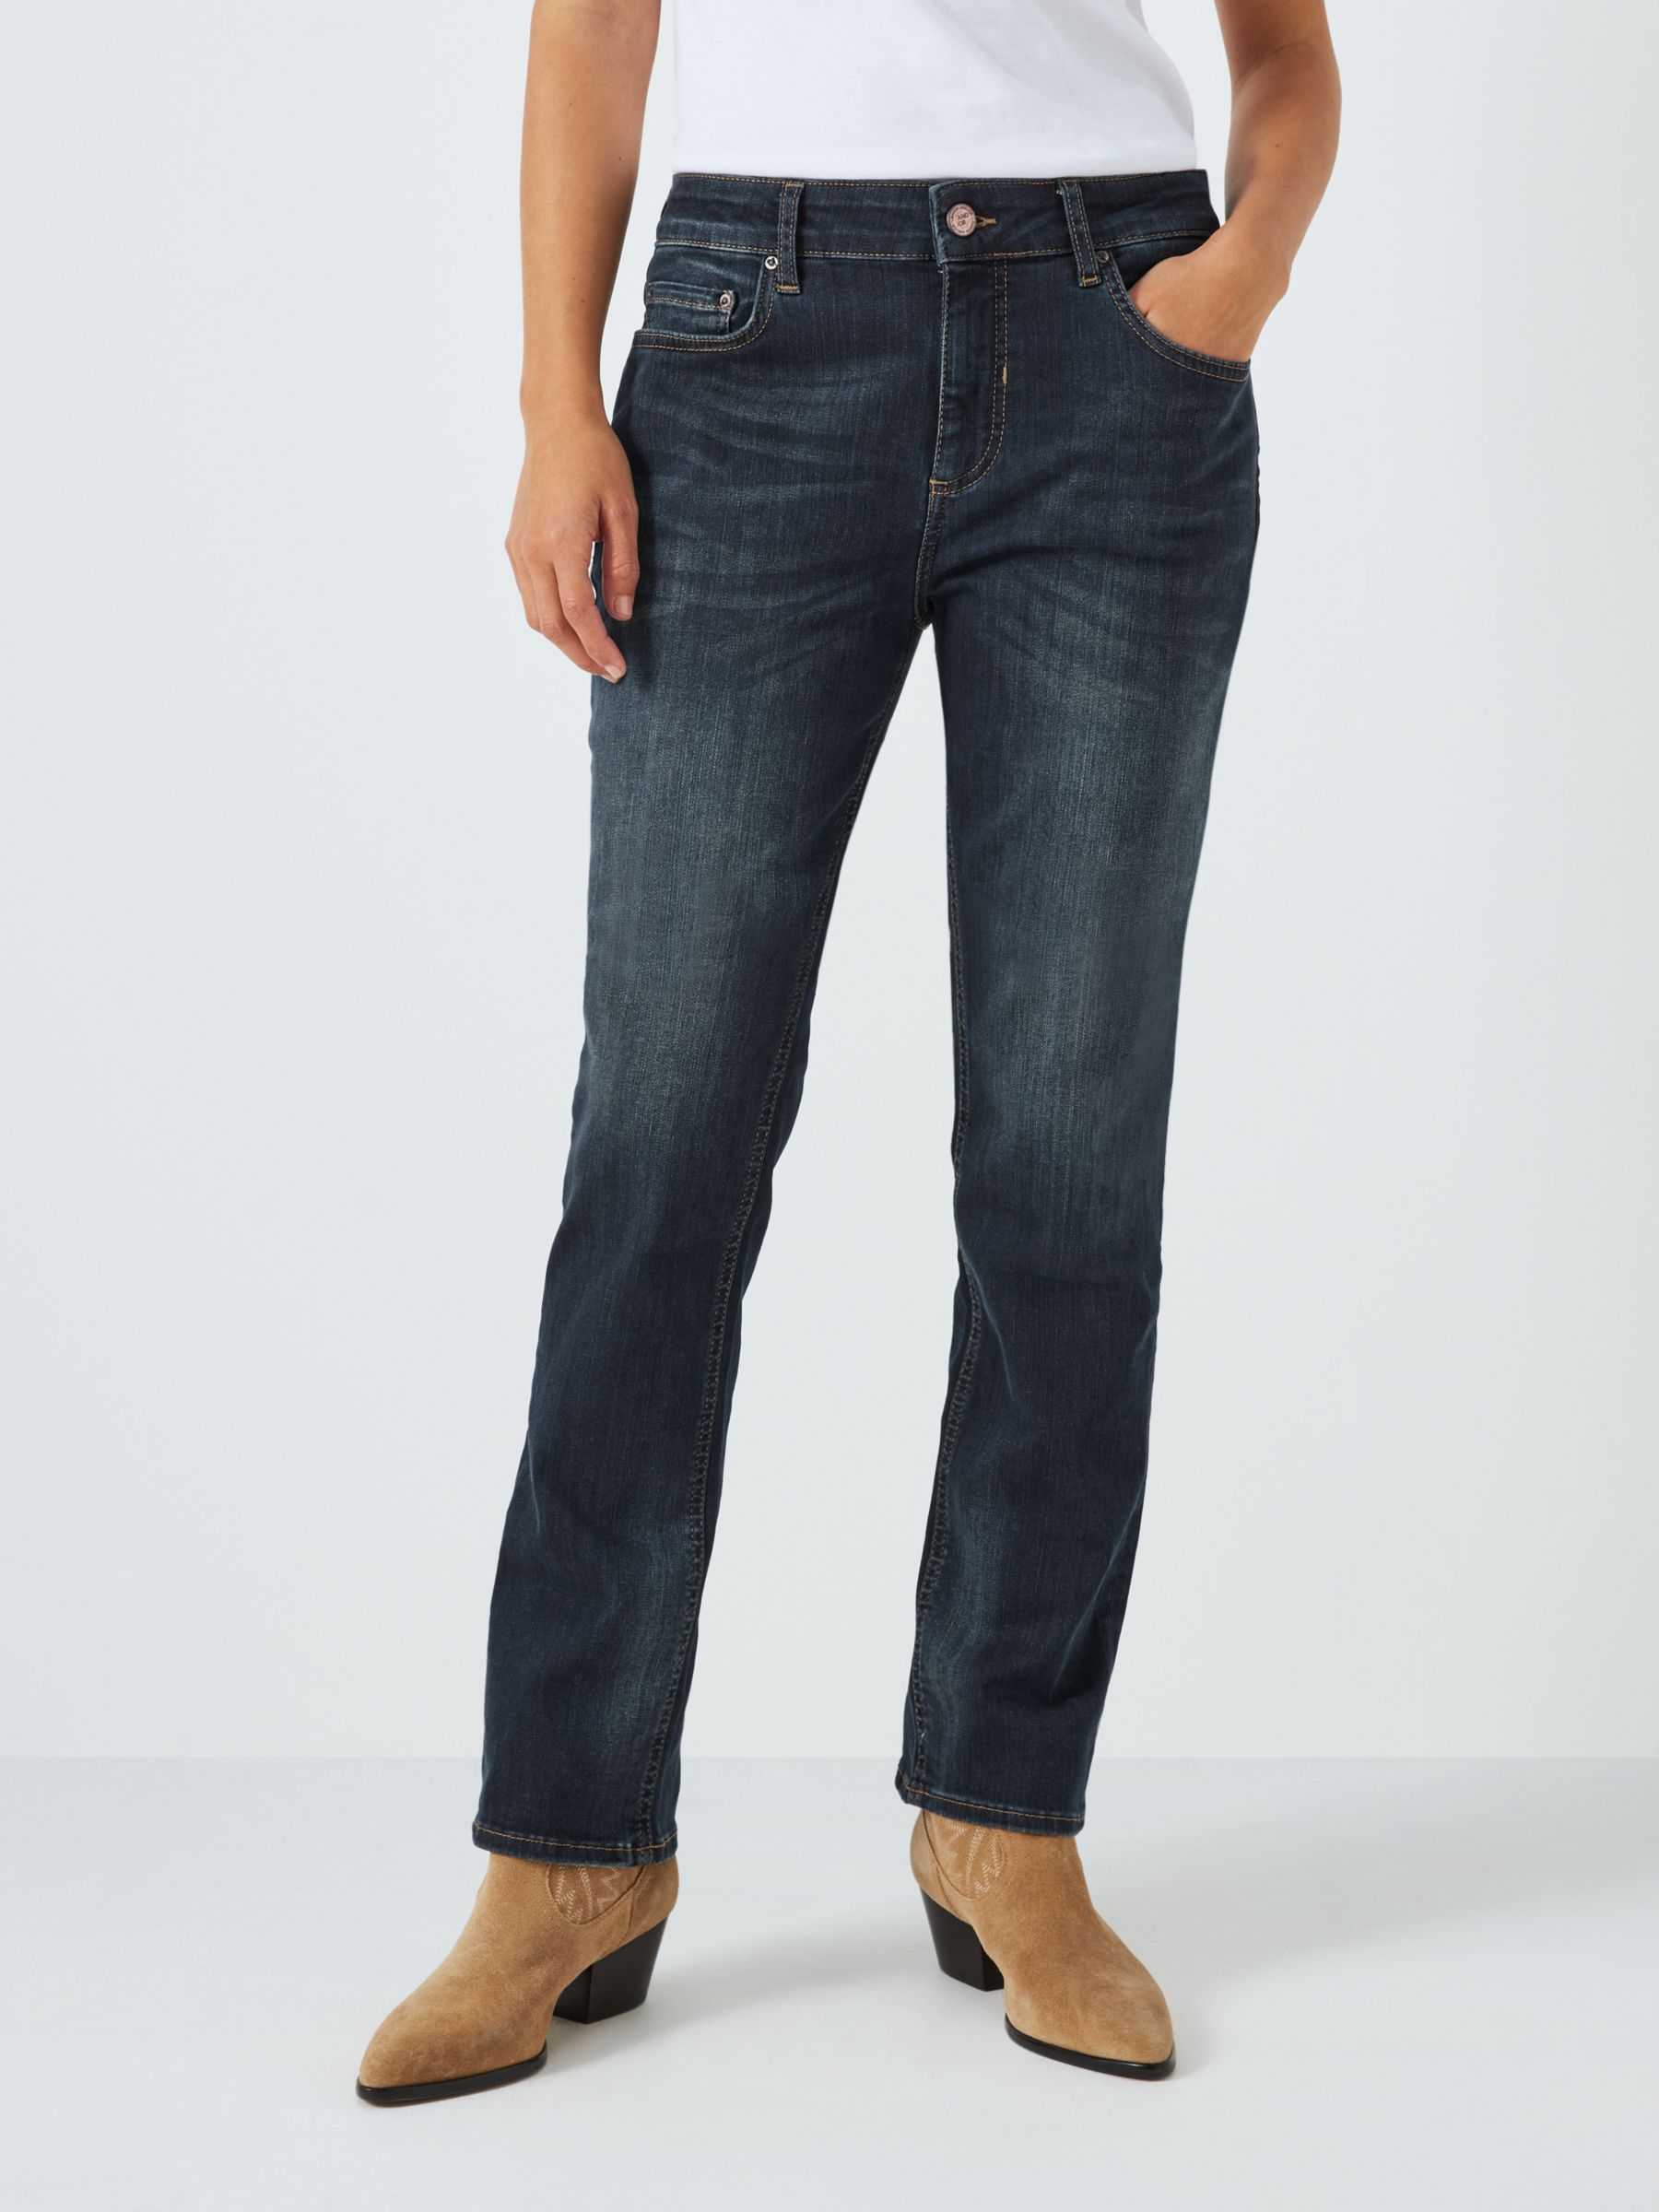 Buy AND/OR Silverlake Straight Leg Jeans Online at johnlewis.com